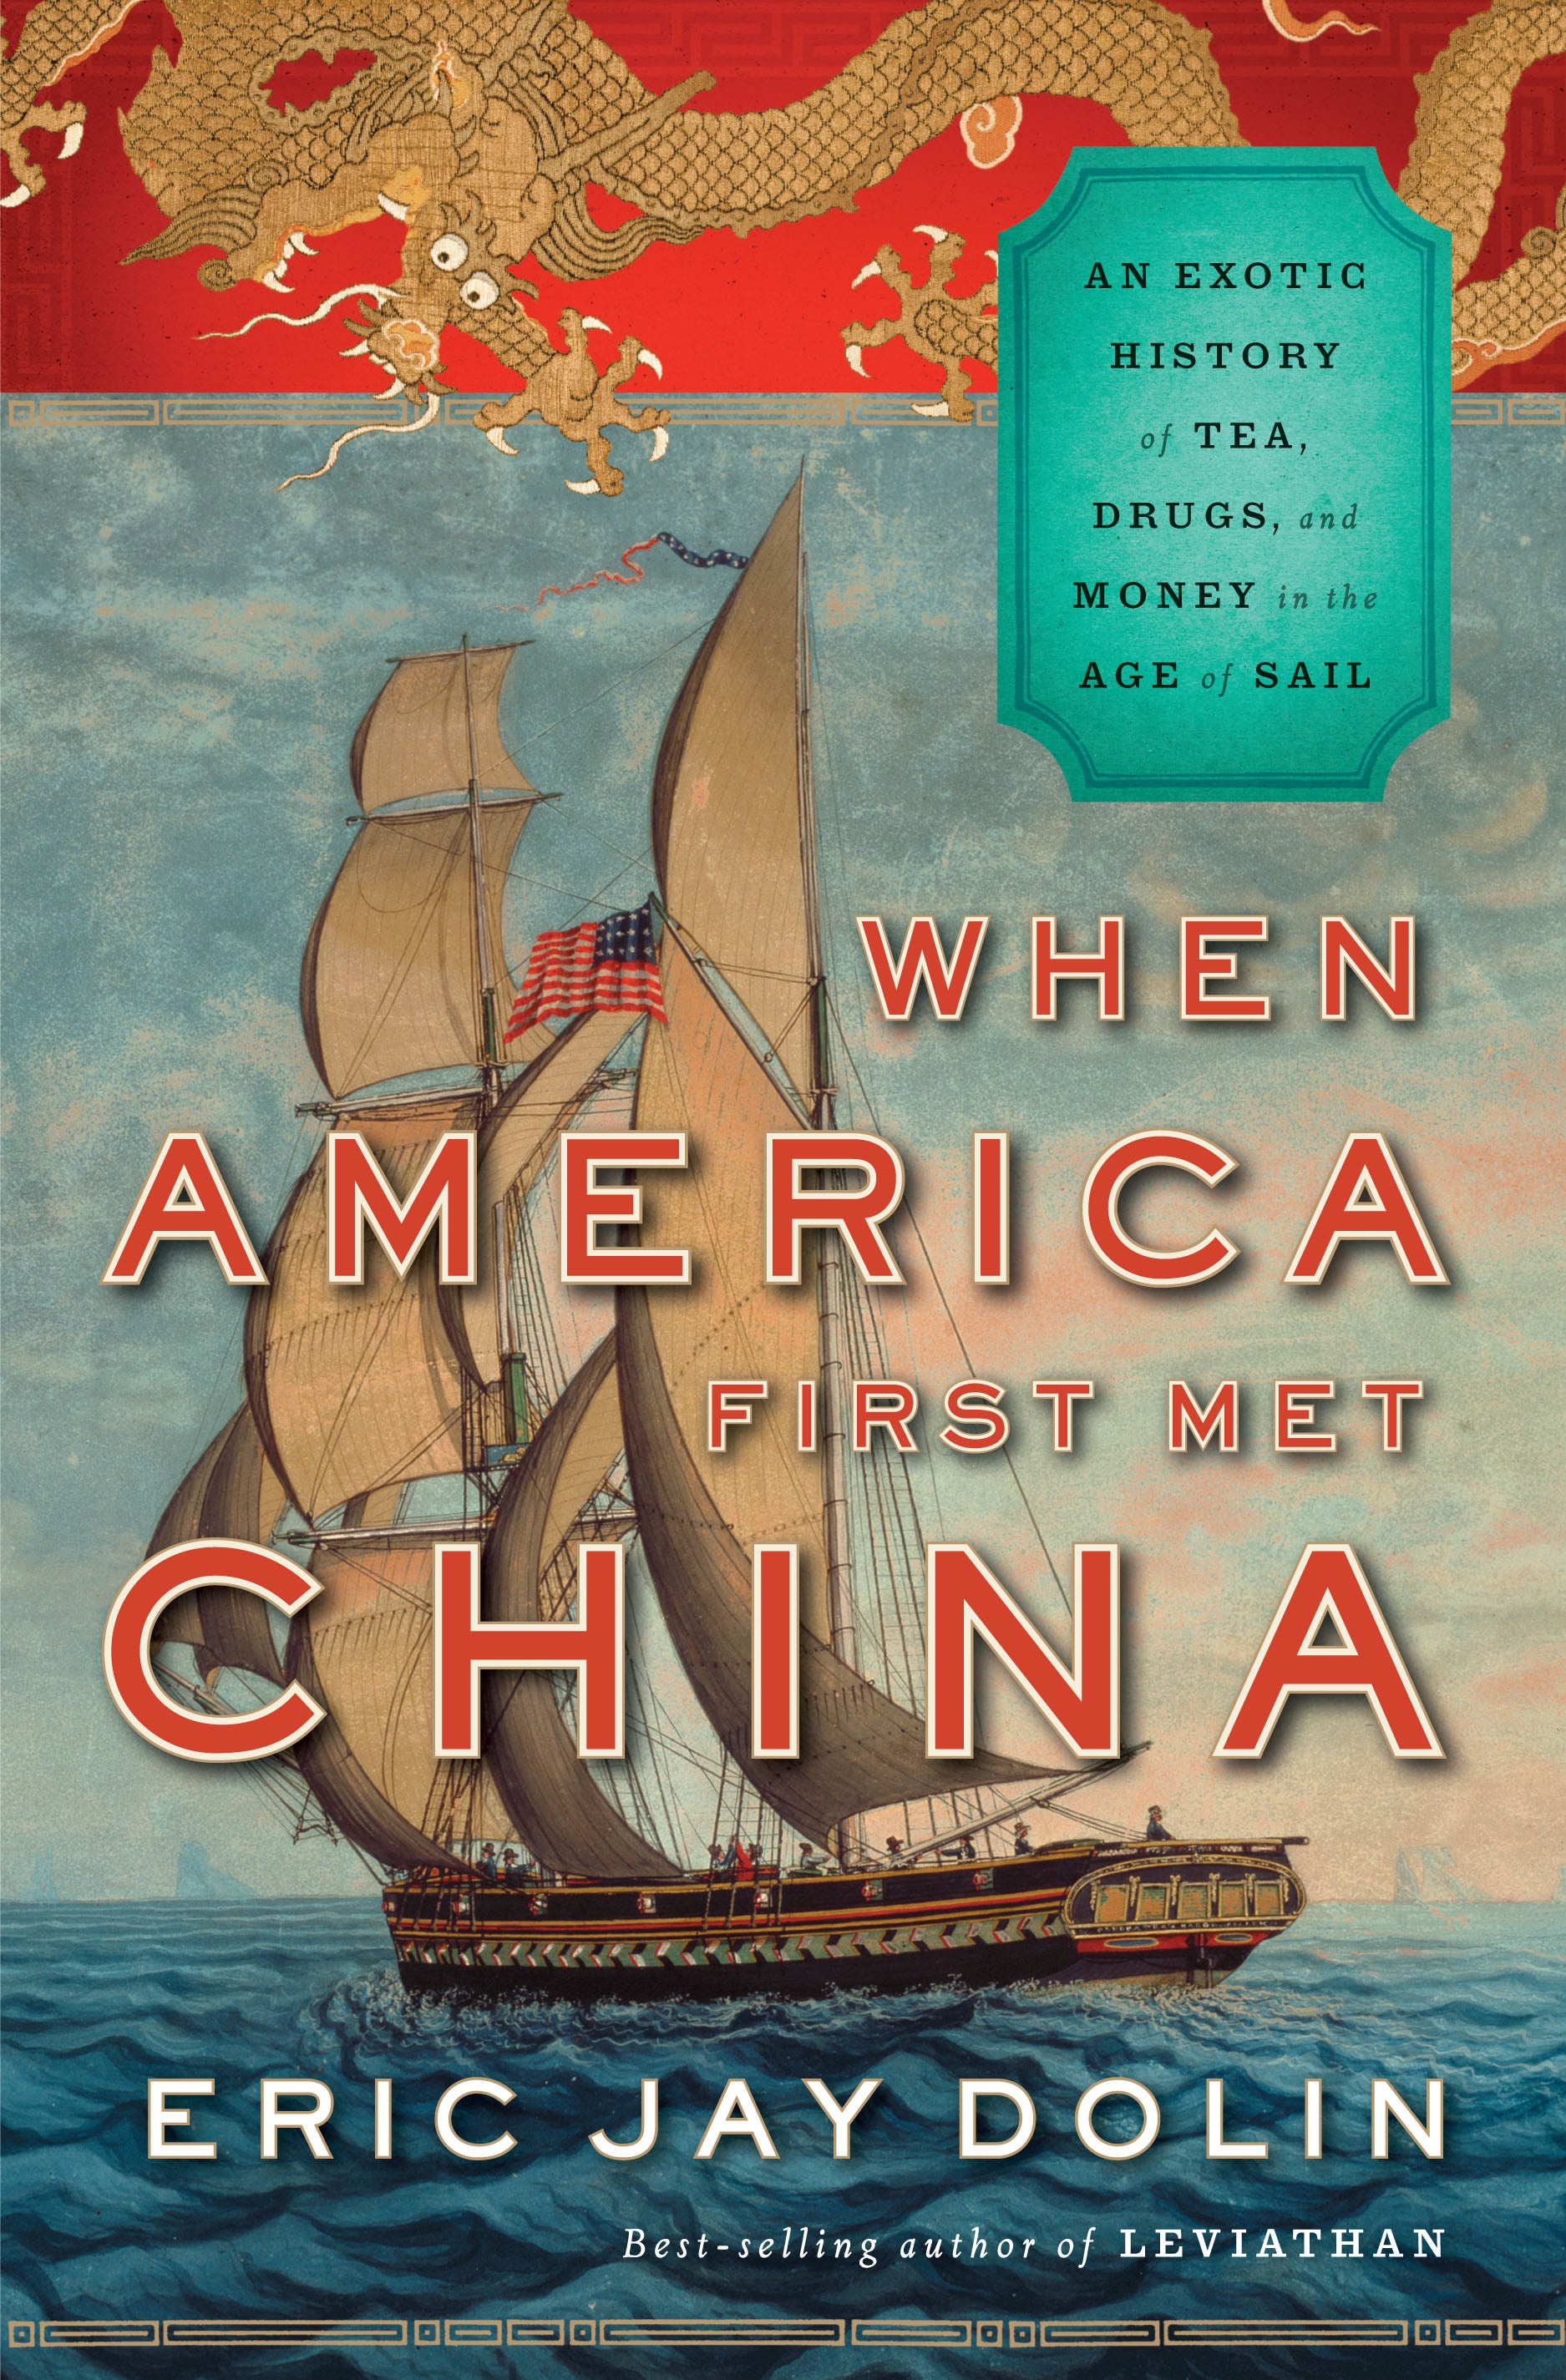 Dolin: When America First Met China